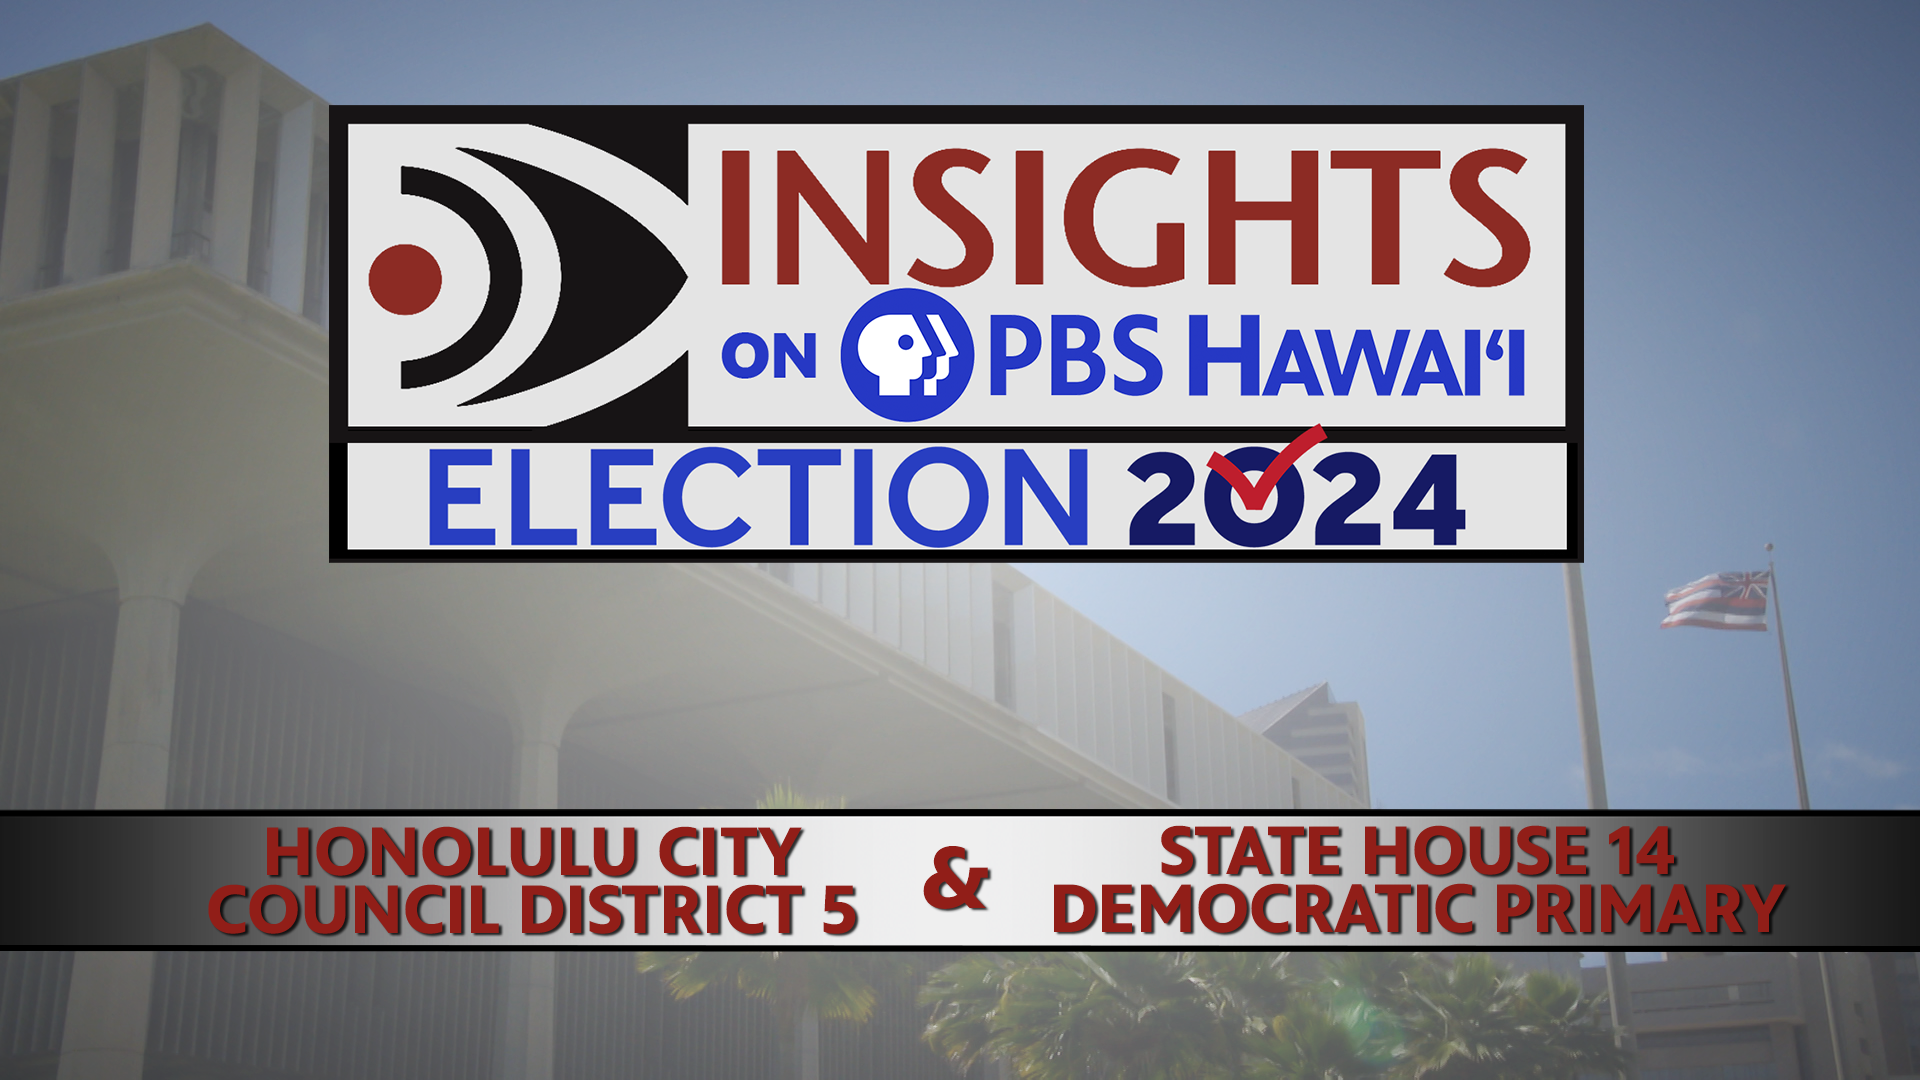 Honolulu City Council District 5 &#038; State House 14 Democratic Primary